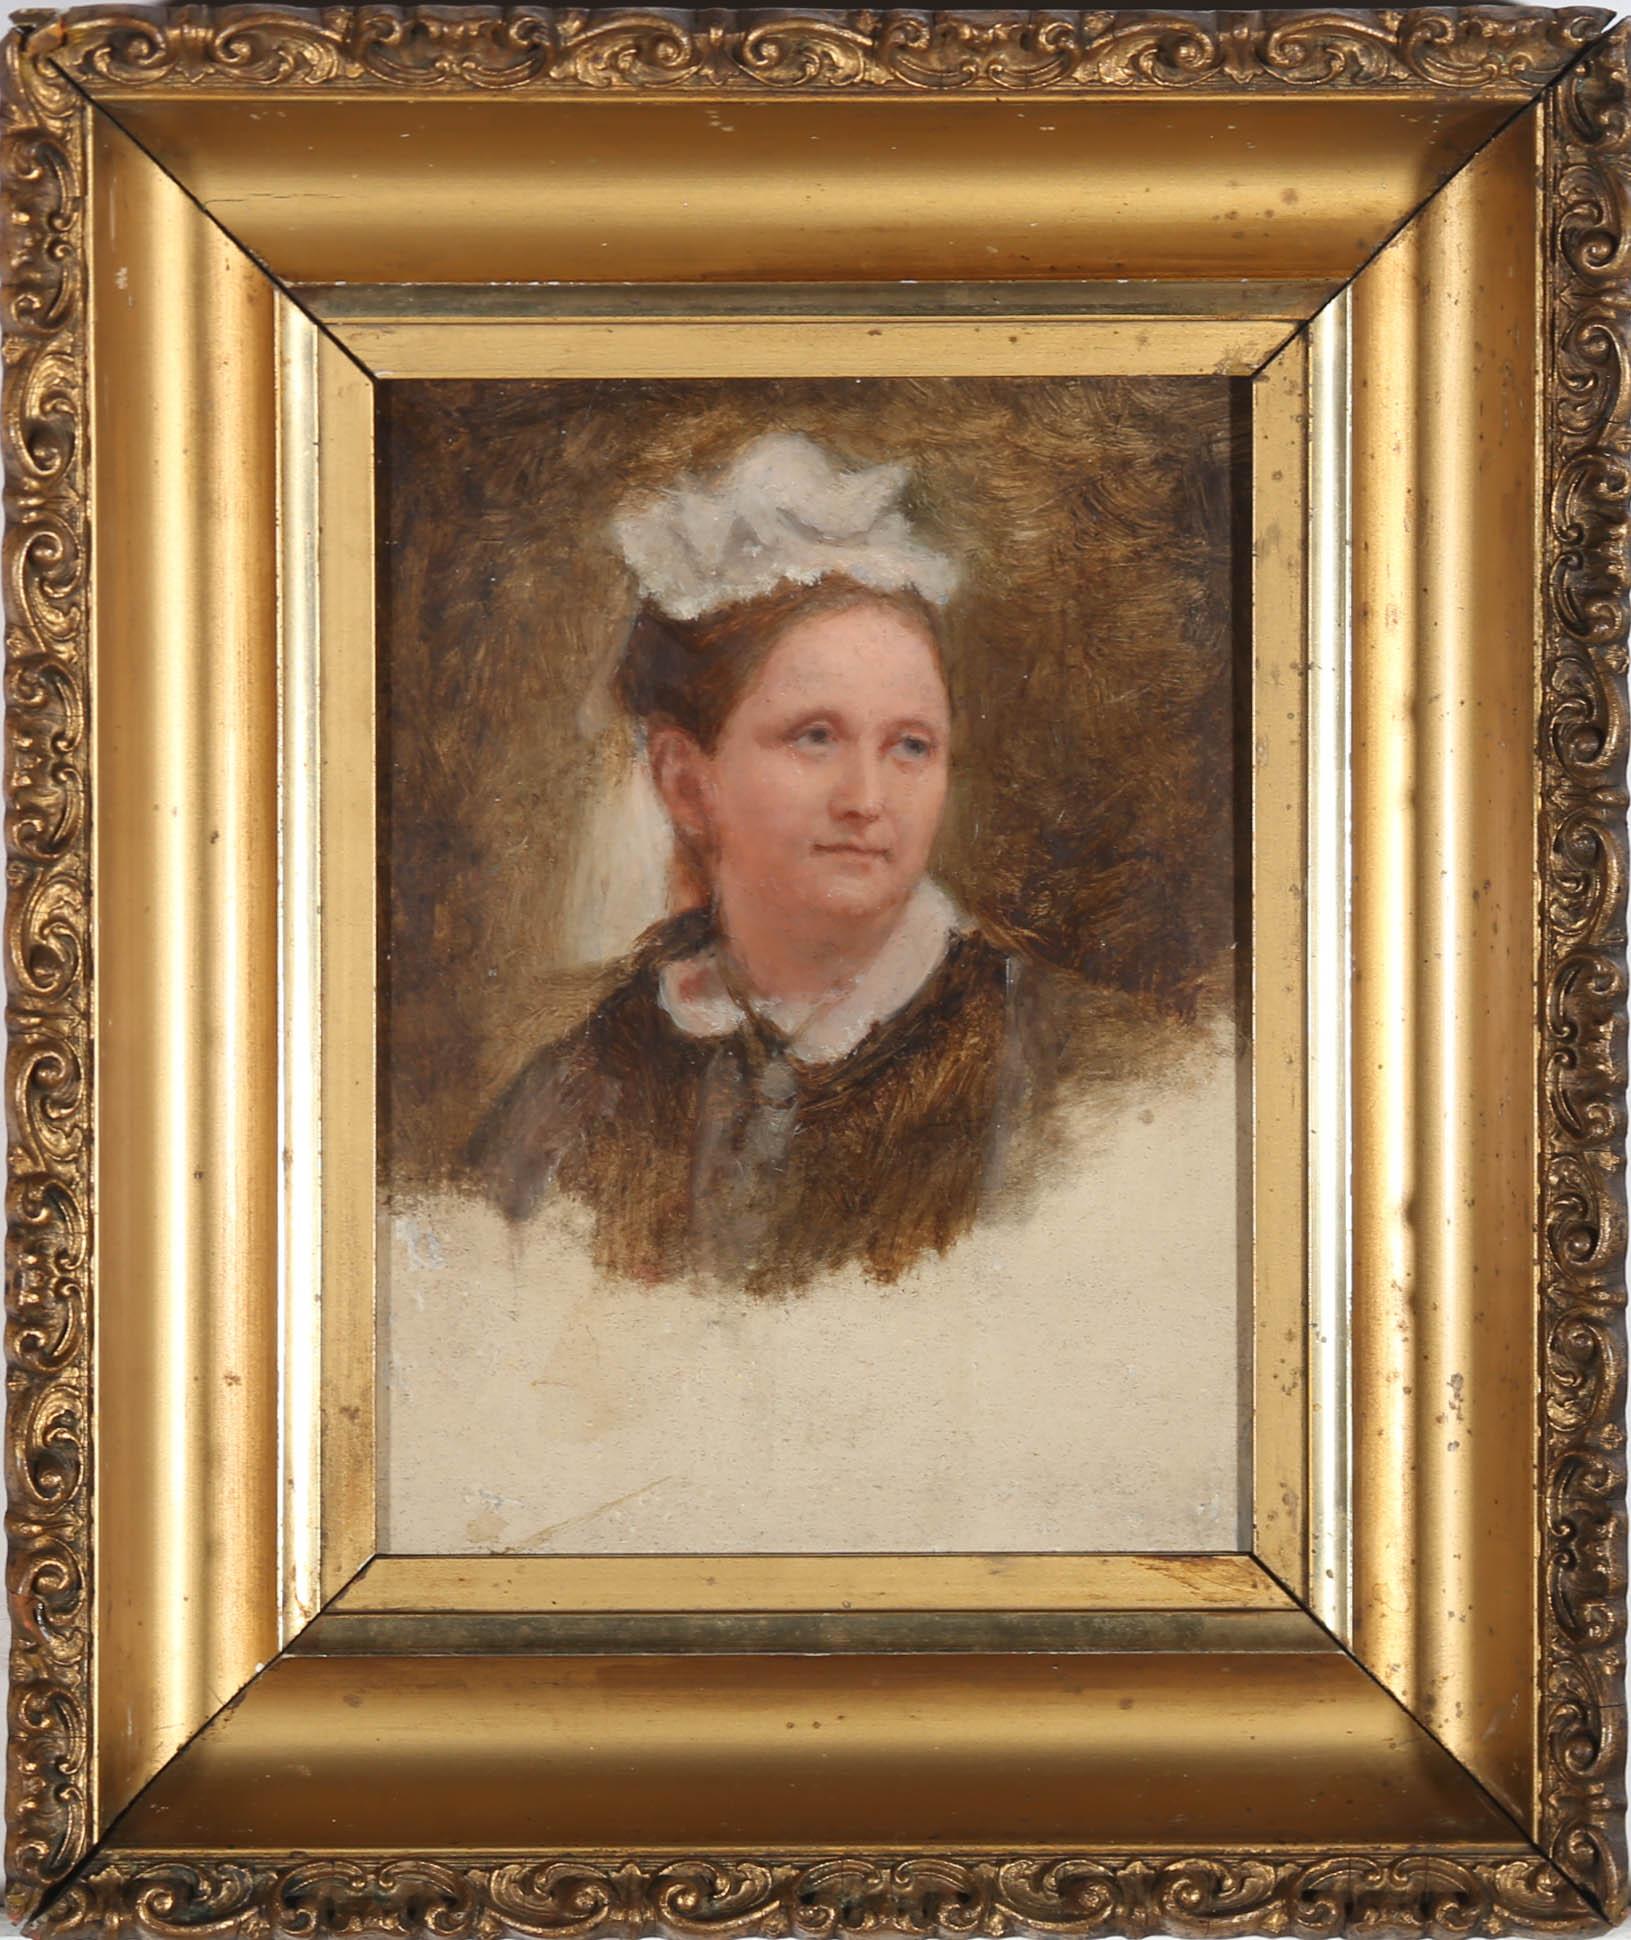 Unknown Portrait Painting - Framed 19th Century Oil - Portrait of a Maid